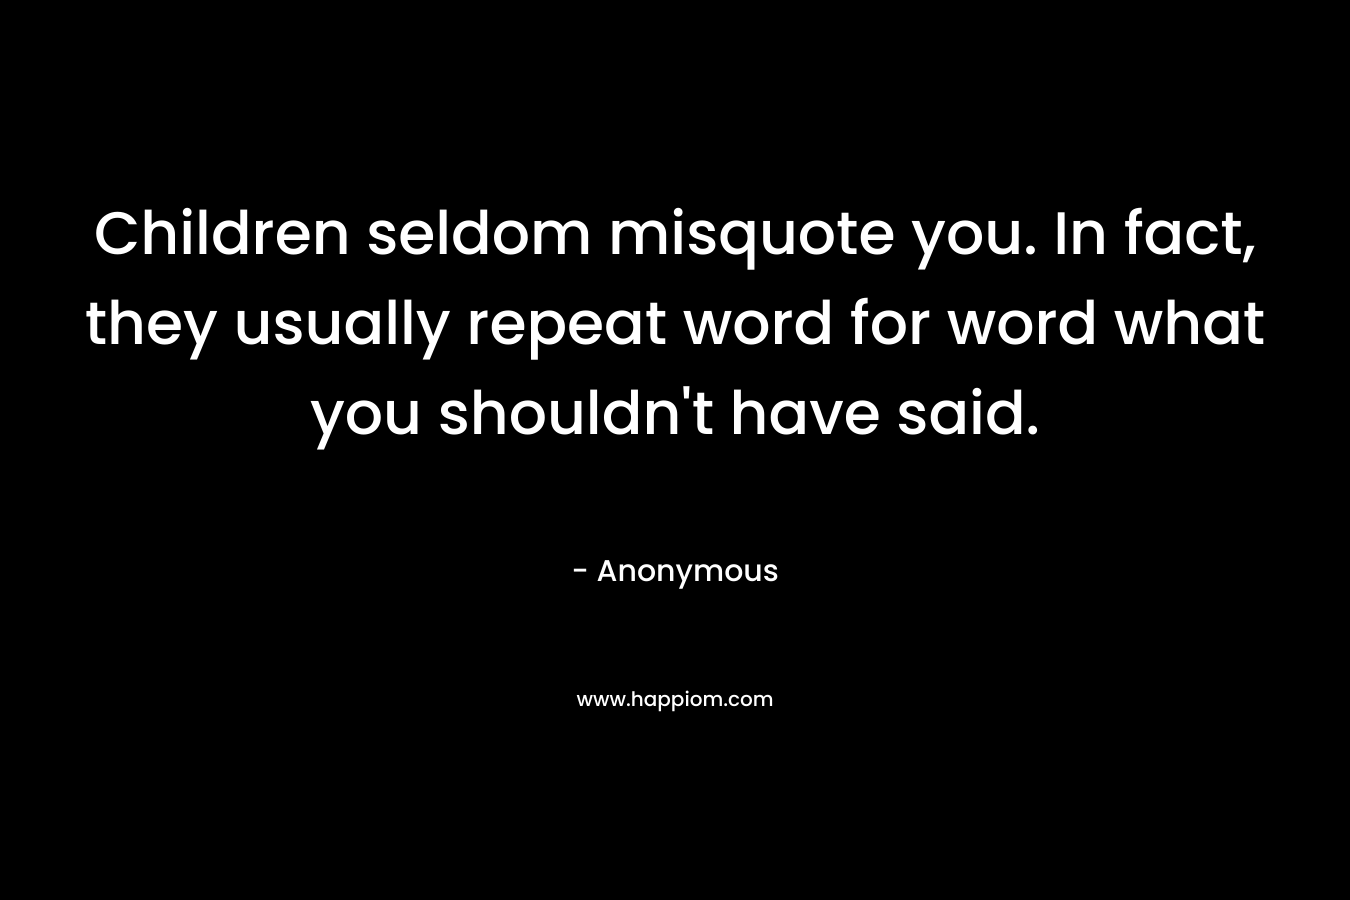 Children seldom misquote you. In fact, they usually repeat word for word what you shouldn't have said.